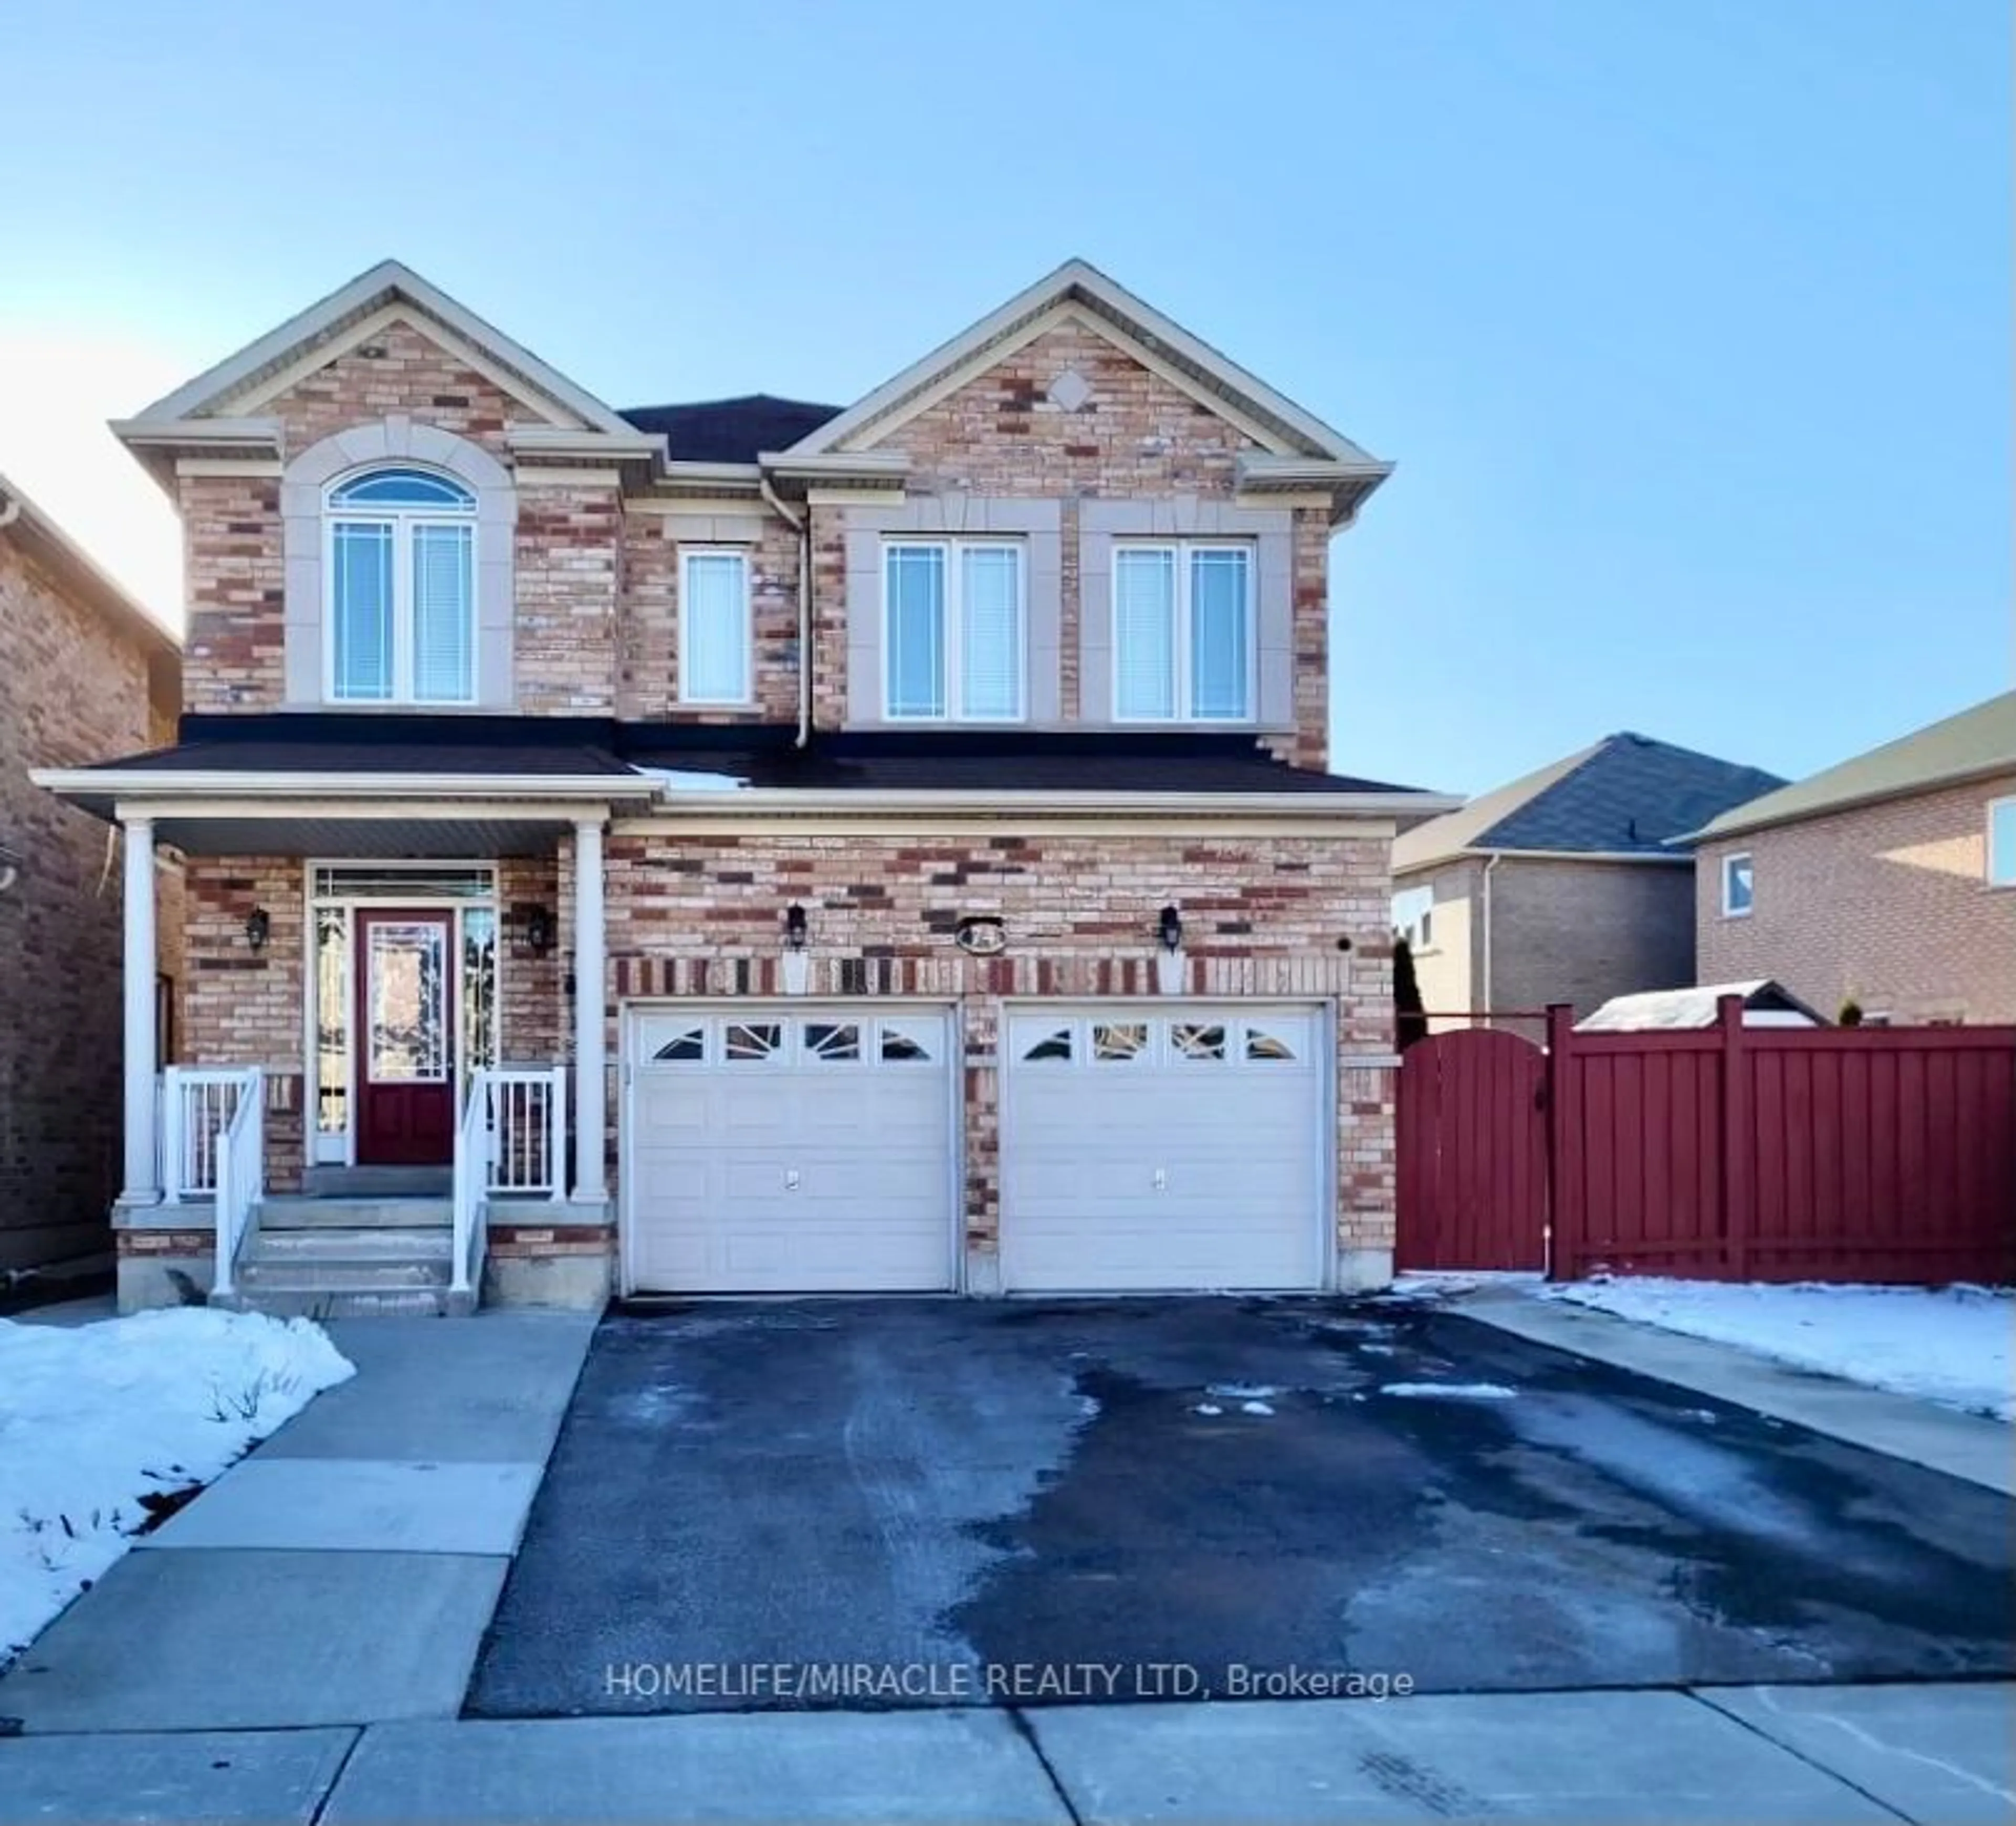 Home with brick exterior material for 74 Skyvalley Dr, Brampton Ontario L6P 3B7